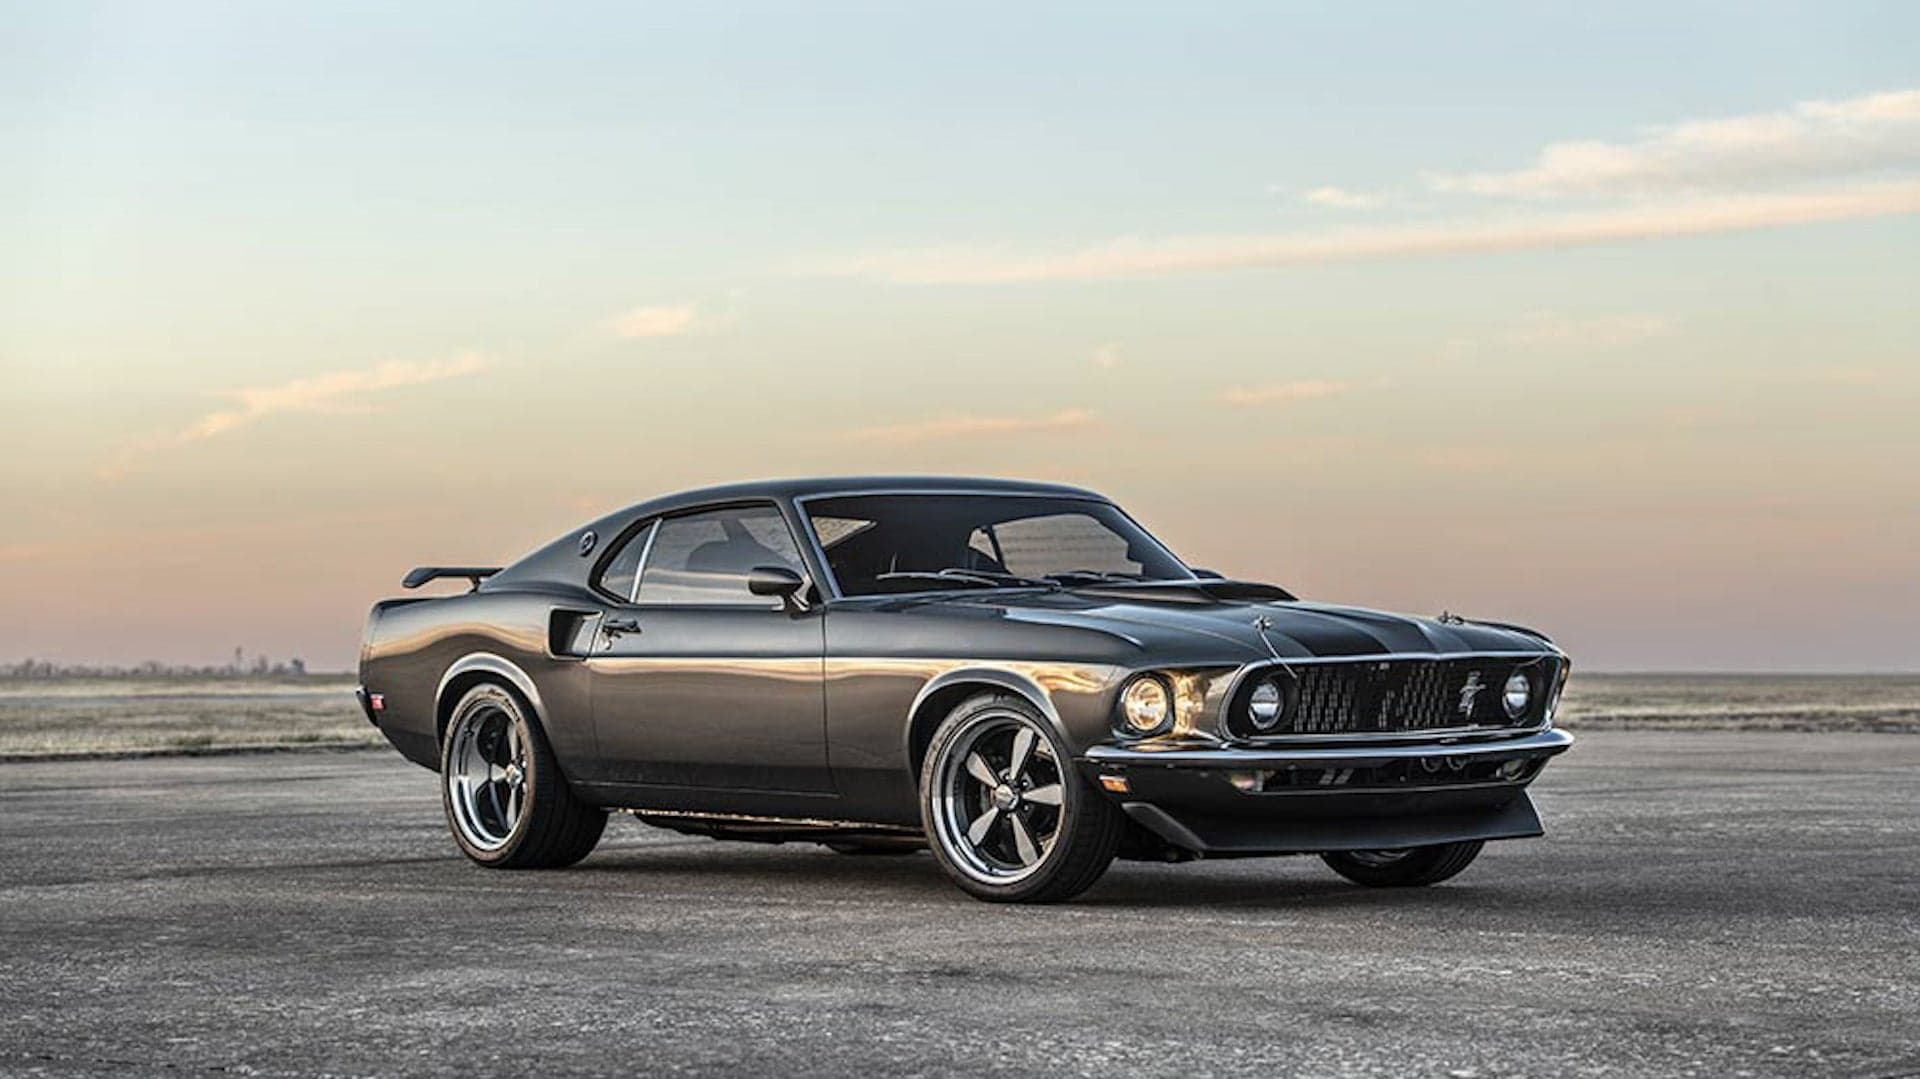 1969 Ford Mustang Mach 1 ‘Hitman’: A 1,000-HP Restomod That Could Murder You